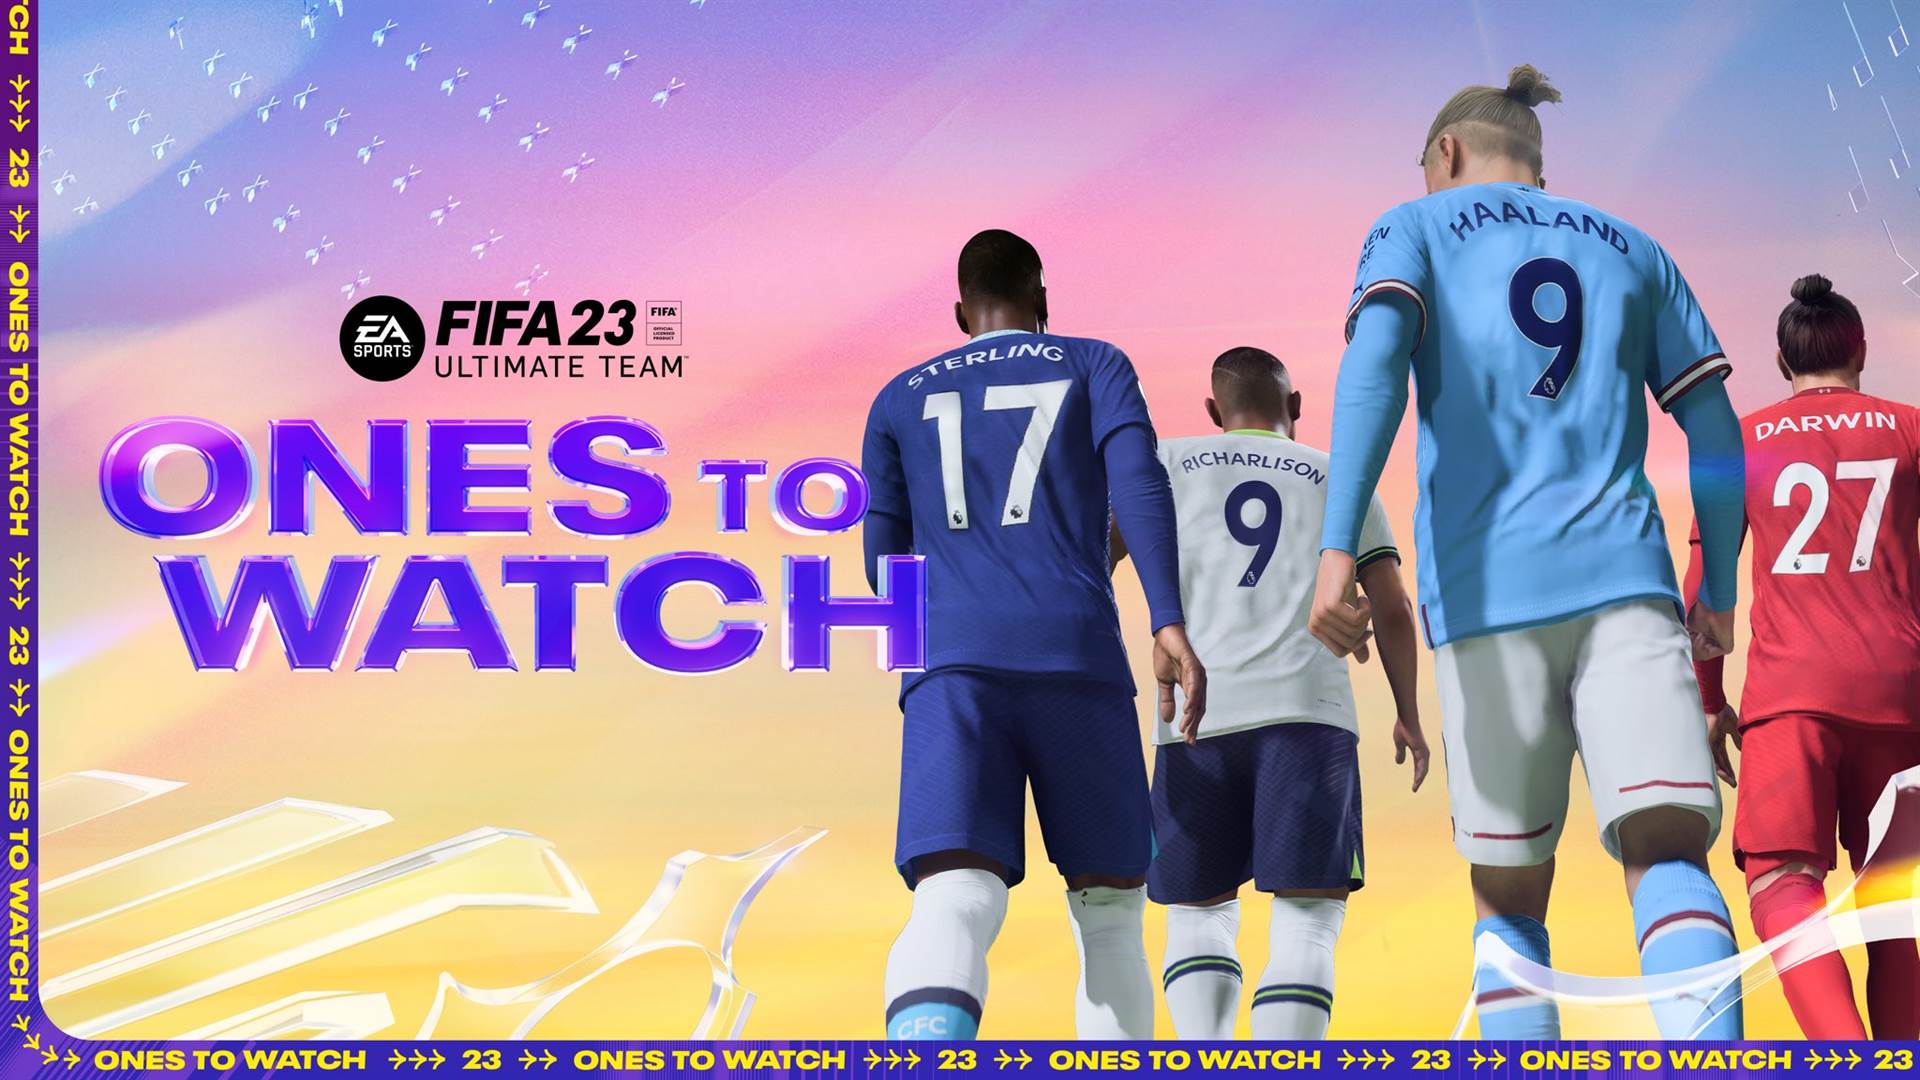 FIFA 23 Ones To Watch Players Confirmed